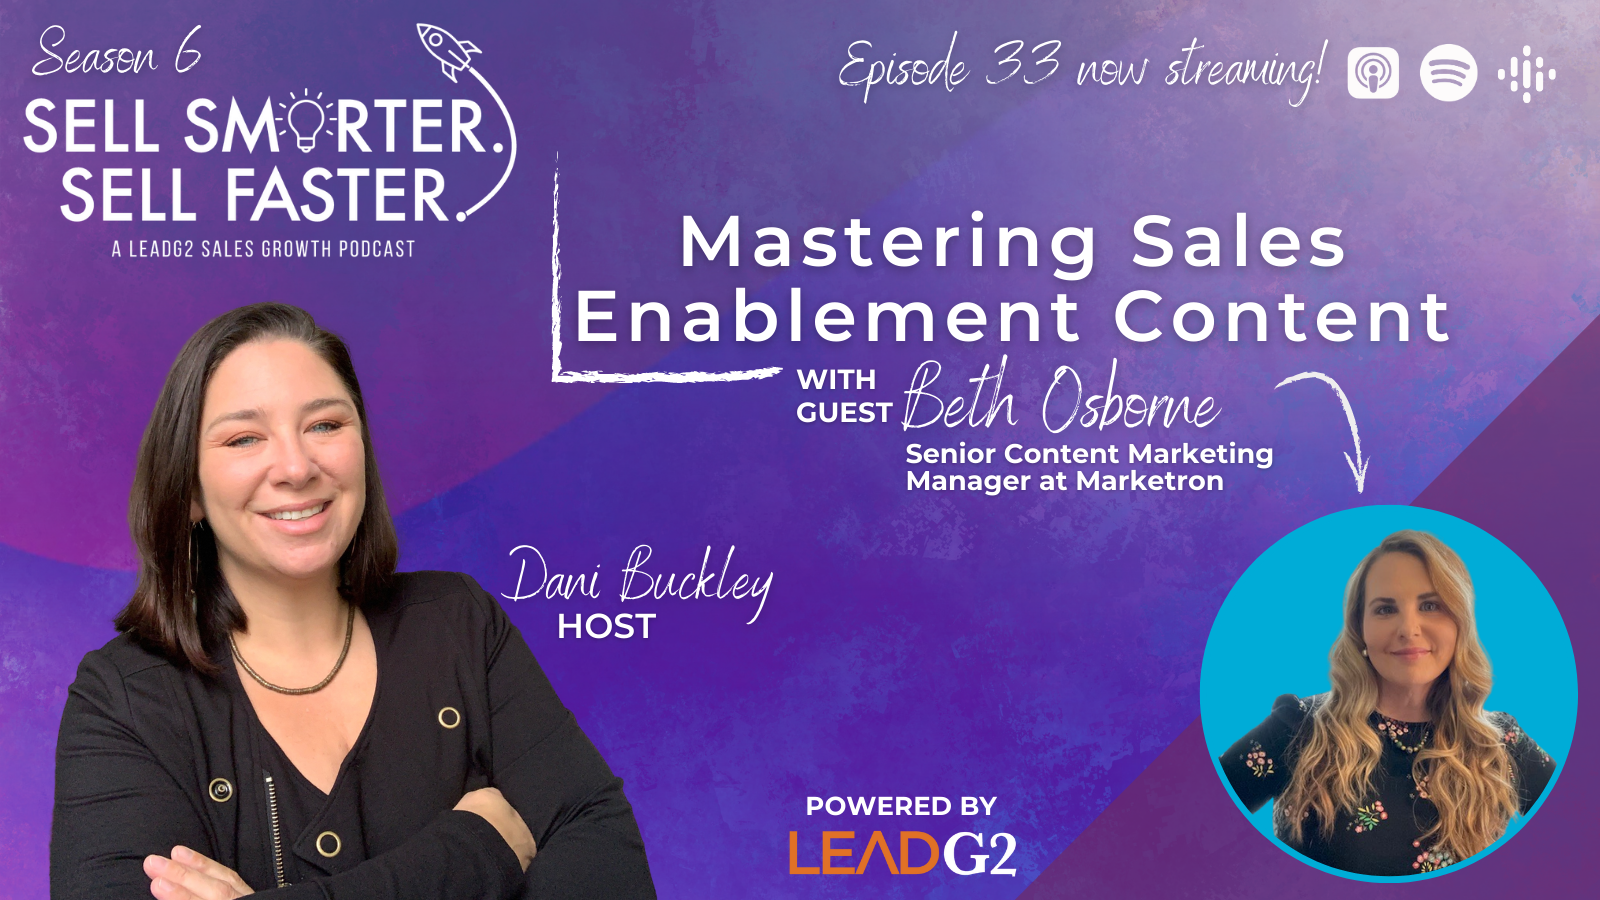 Mastering Sales Enablement Content with Beth Osborne